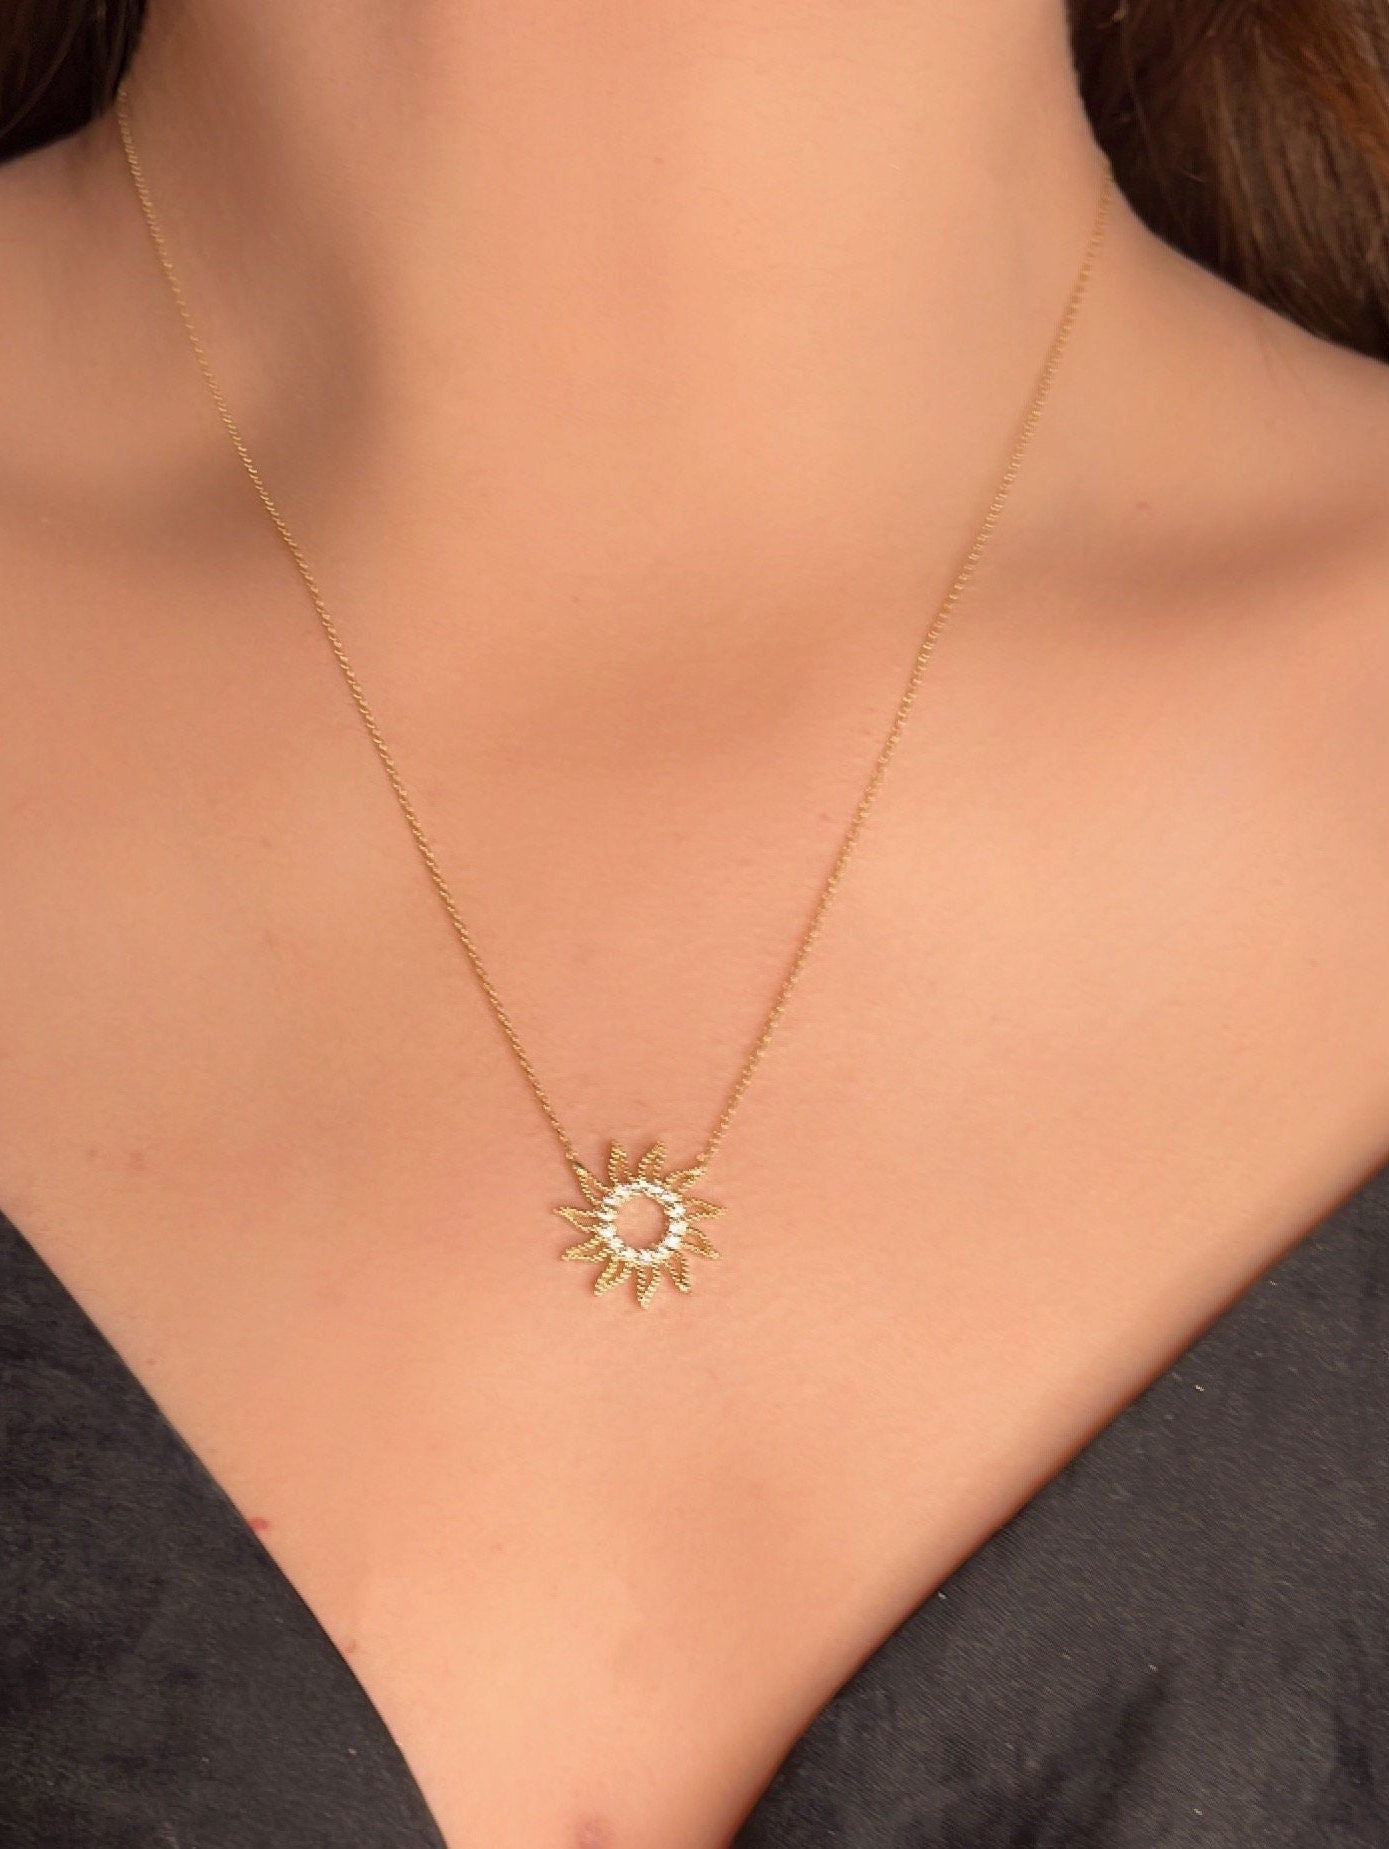 14K Yellow Gold Sun Necklace